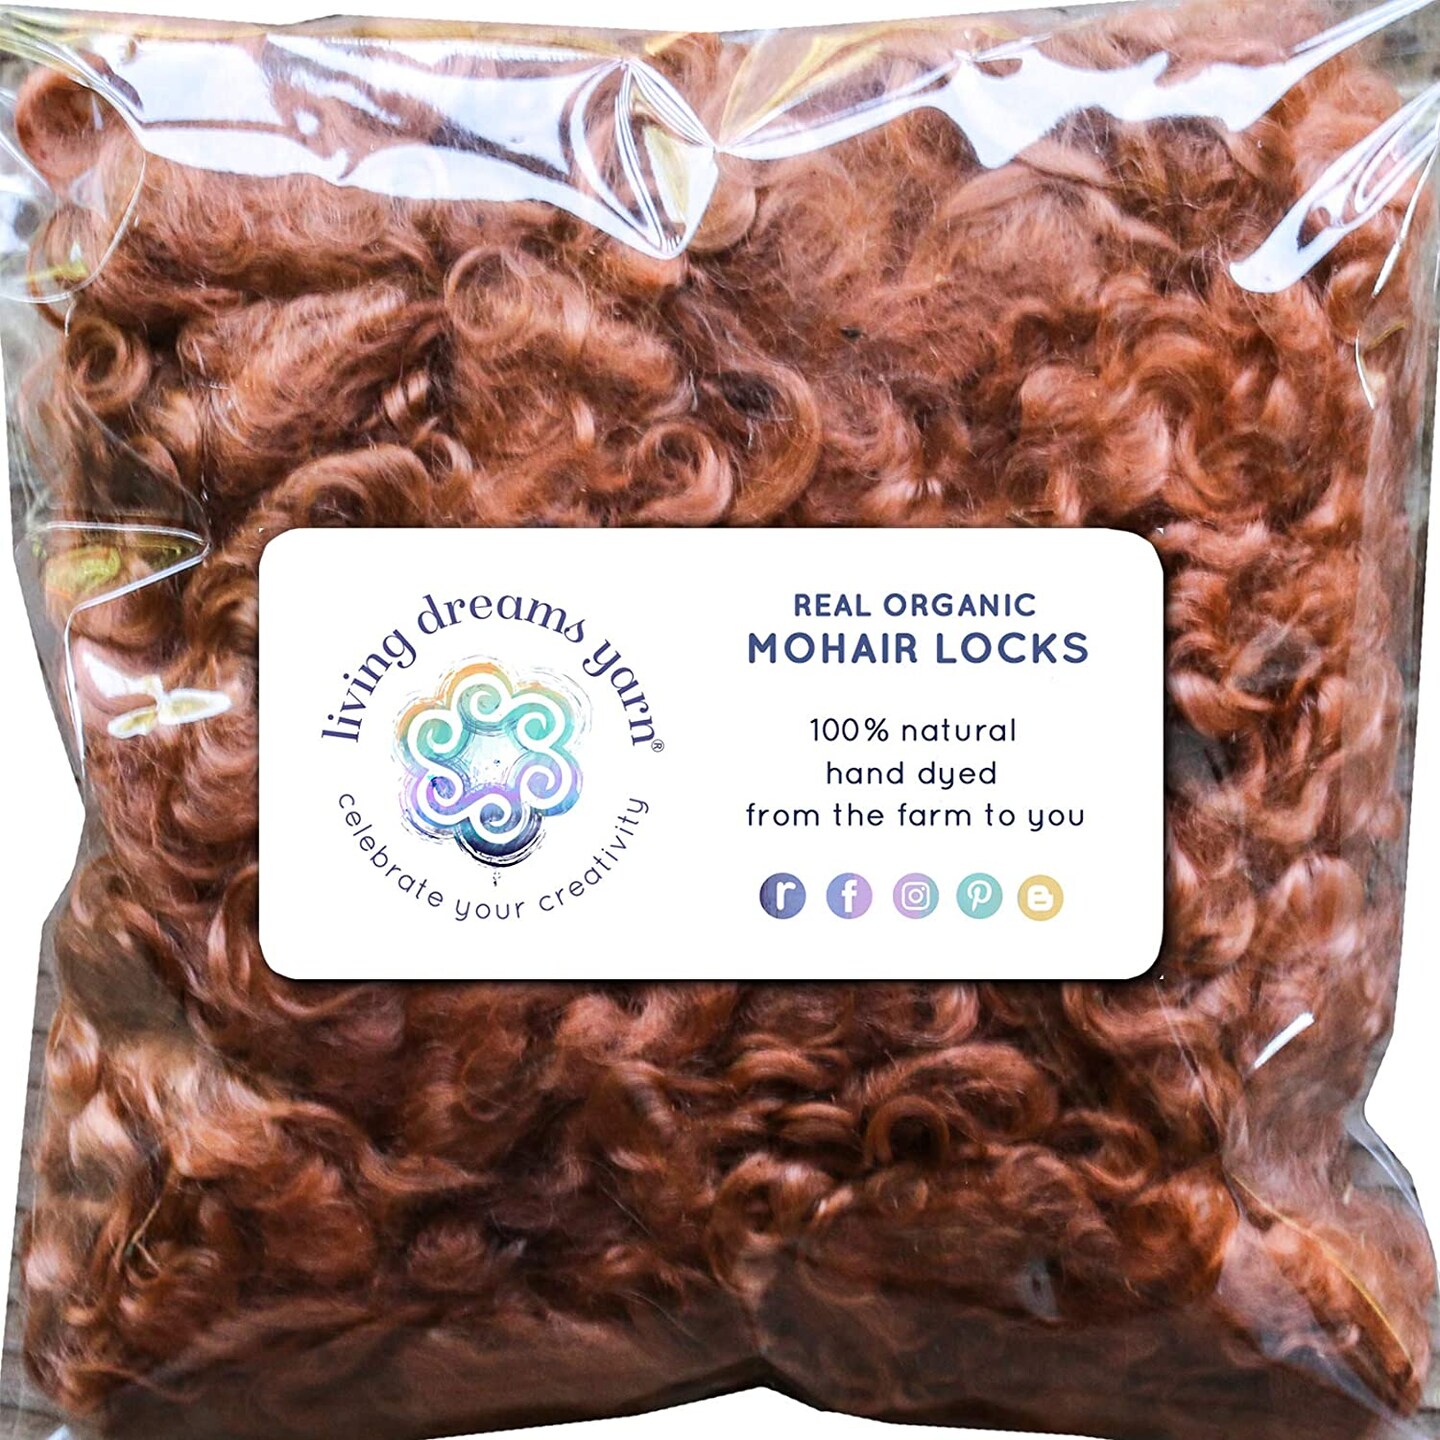 REAL MOHAIR LOCKS. Organic Hand-Dyed Curly Wool for Rooting Doll Hair, Felting, Blending, Spinning. 1oz